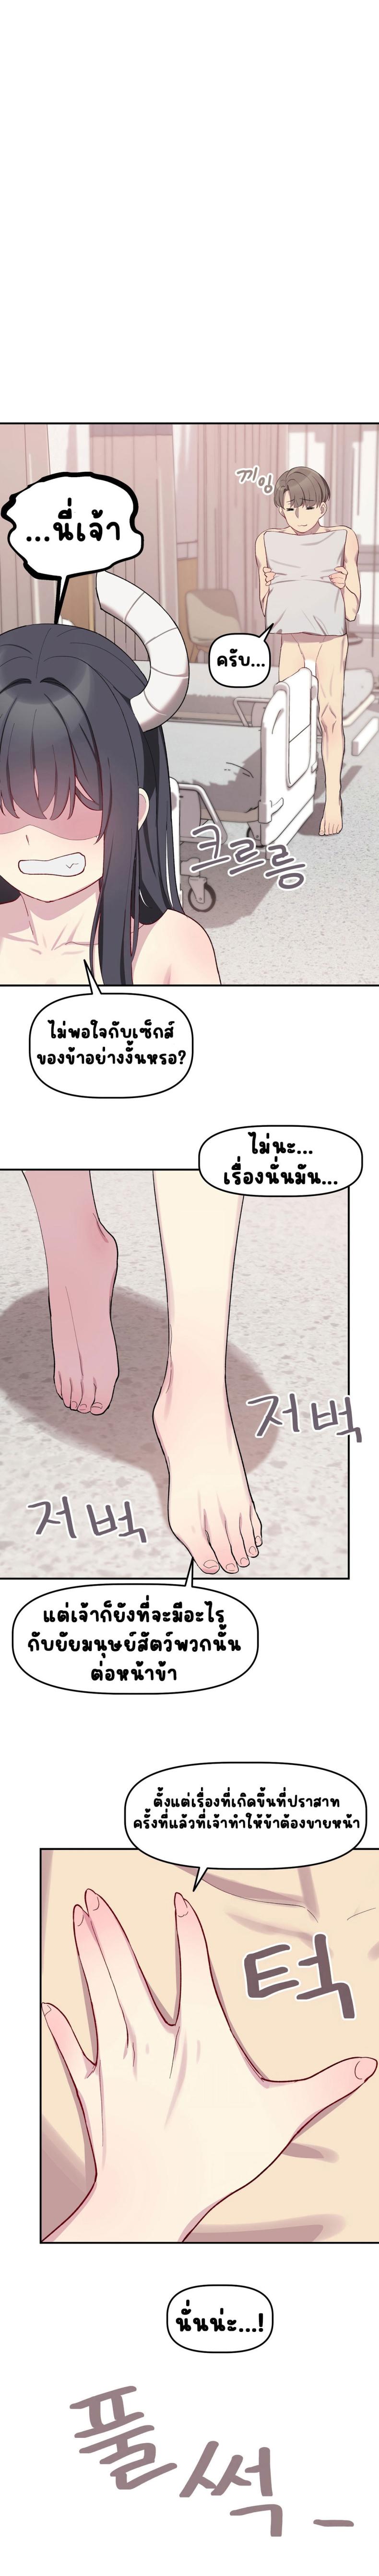 Hospitalized Life in Another World 5-0 ภาพที่ 1